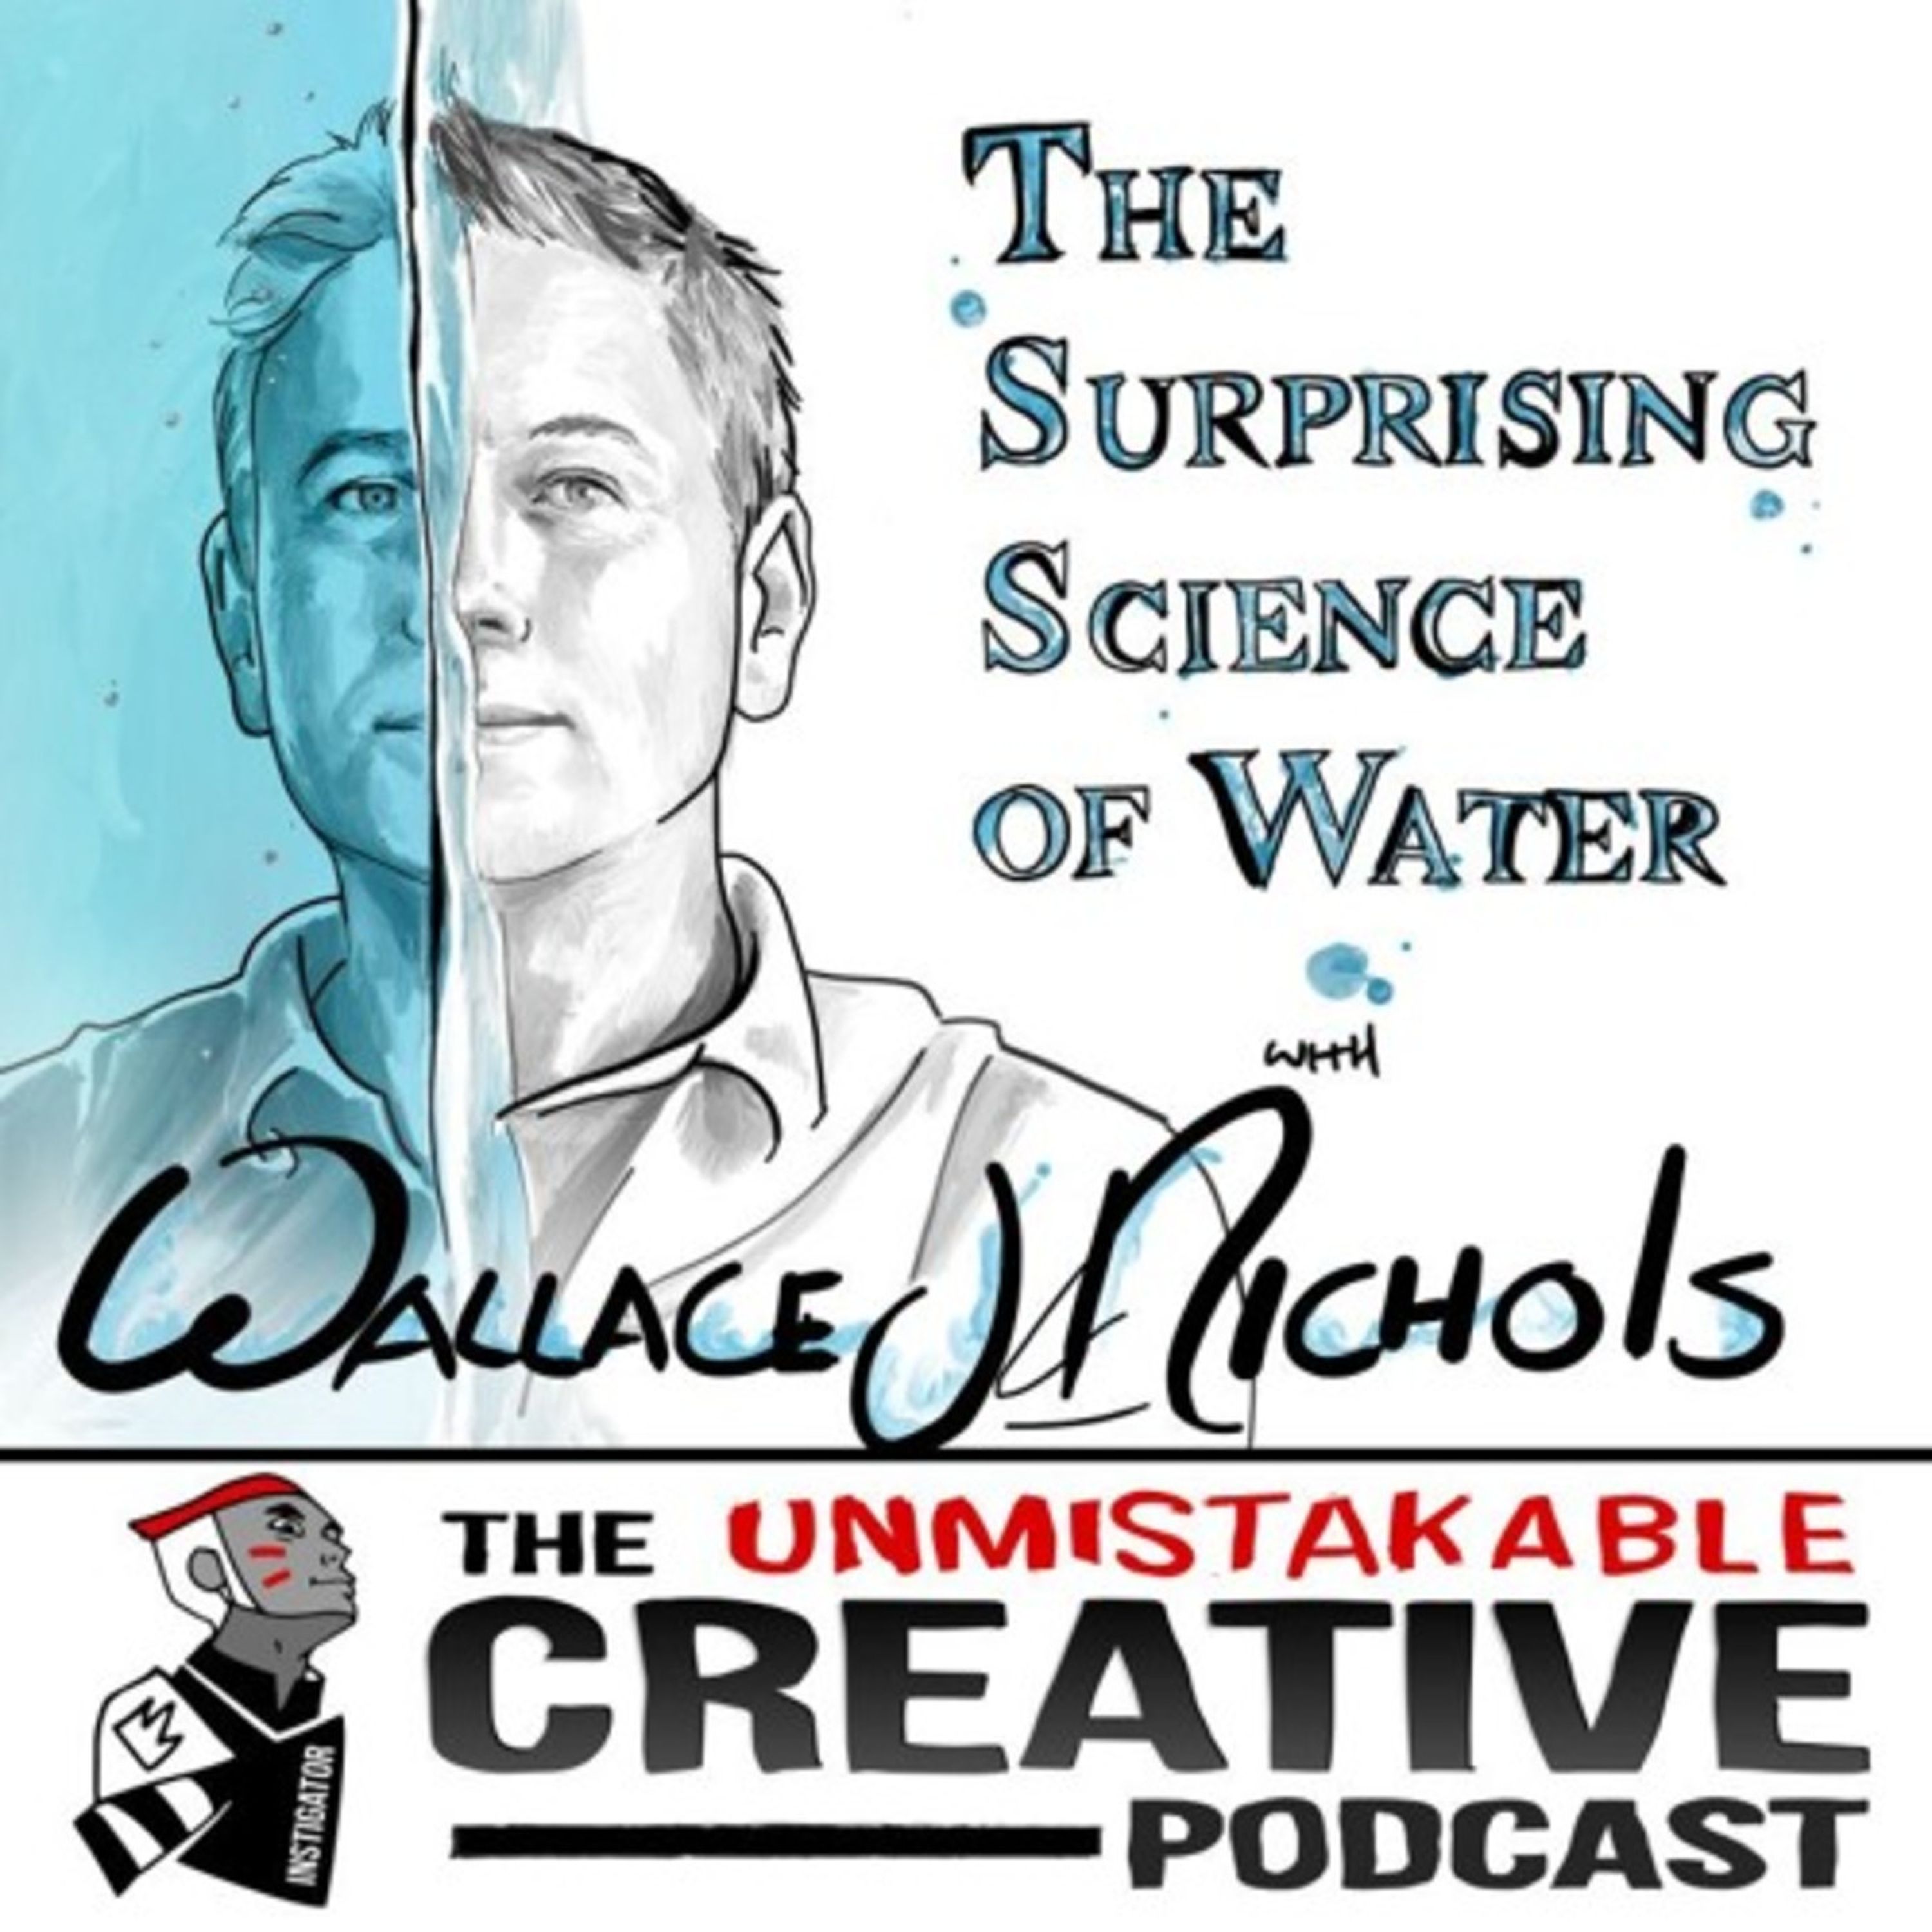 Best of: The Surprising Science of Water with Wallace Nichols